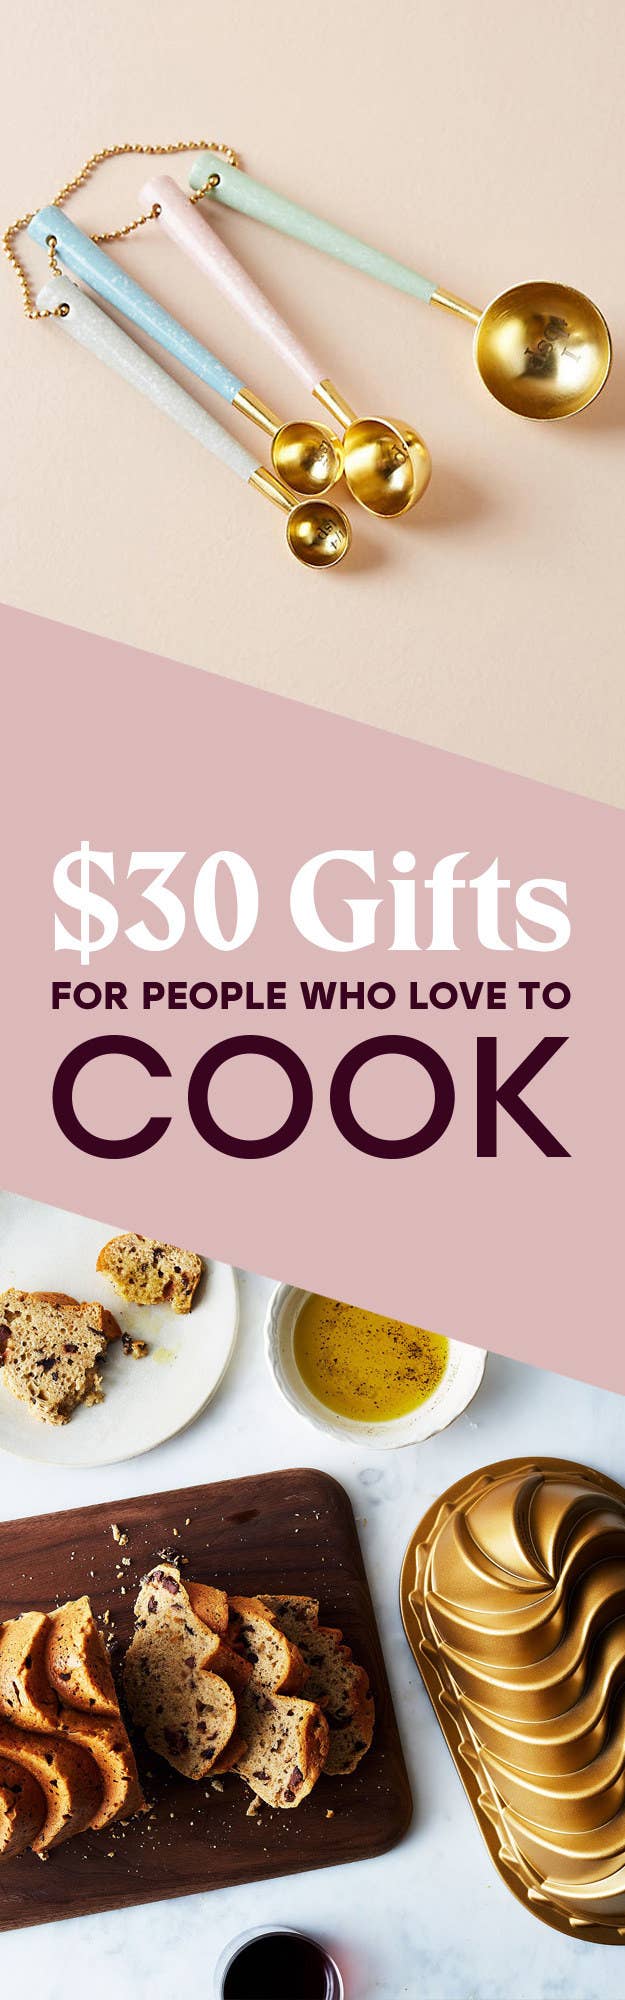 30+ gifts for people who love to cook